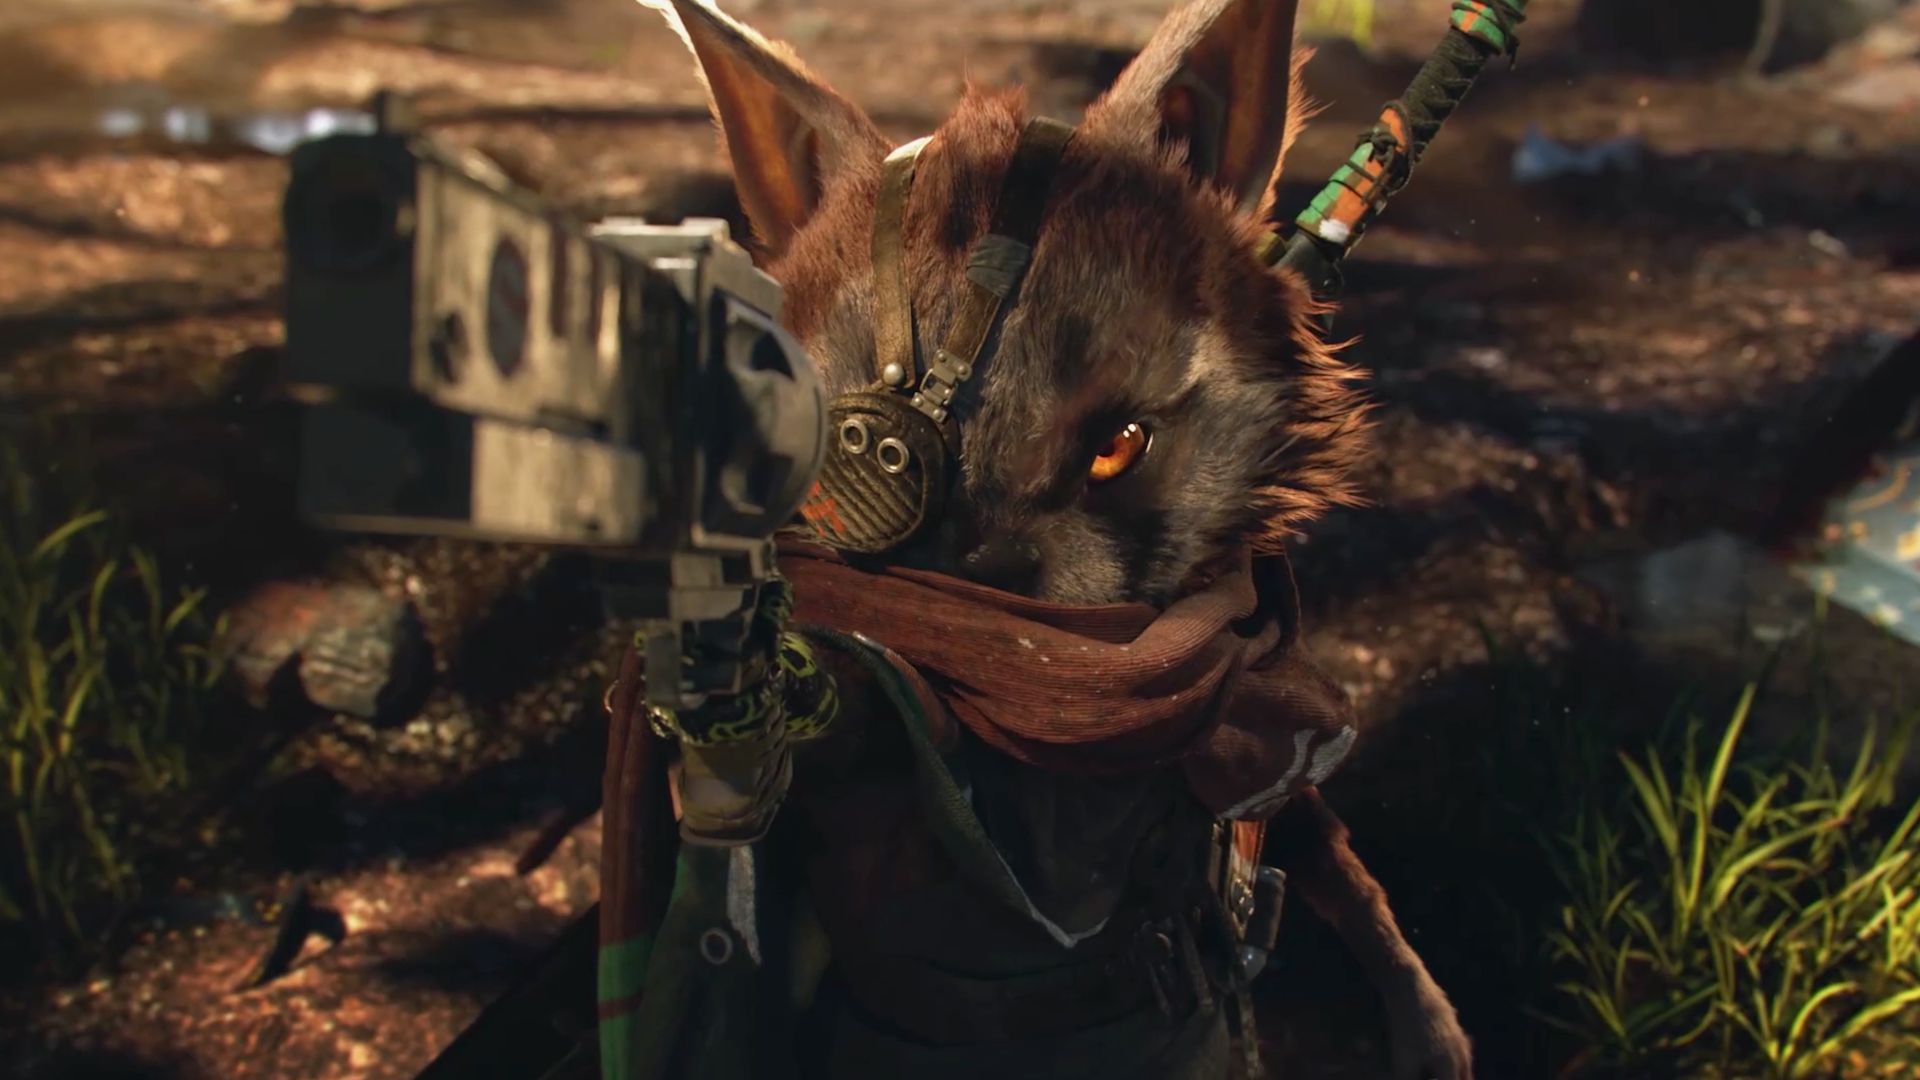 Biomutant: Immerse yourself in the fascinating world of Biomutant, where you can play as a mutant creature in a post-apocalyptic world. The breathtaking graphics and unique gameplay will keep you engaged for hours. Don\'t miss out on exploring this incredible universe full of wonder and danger!